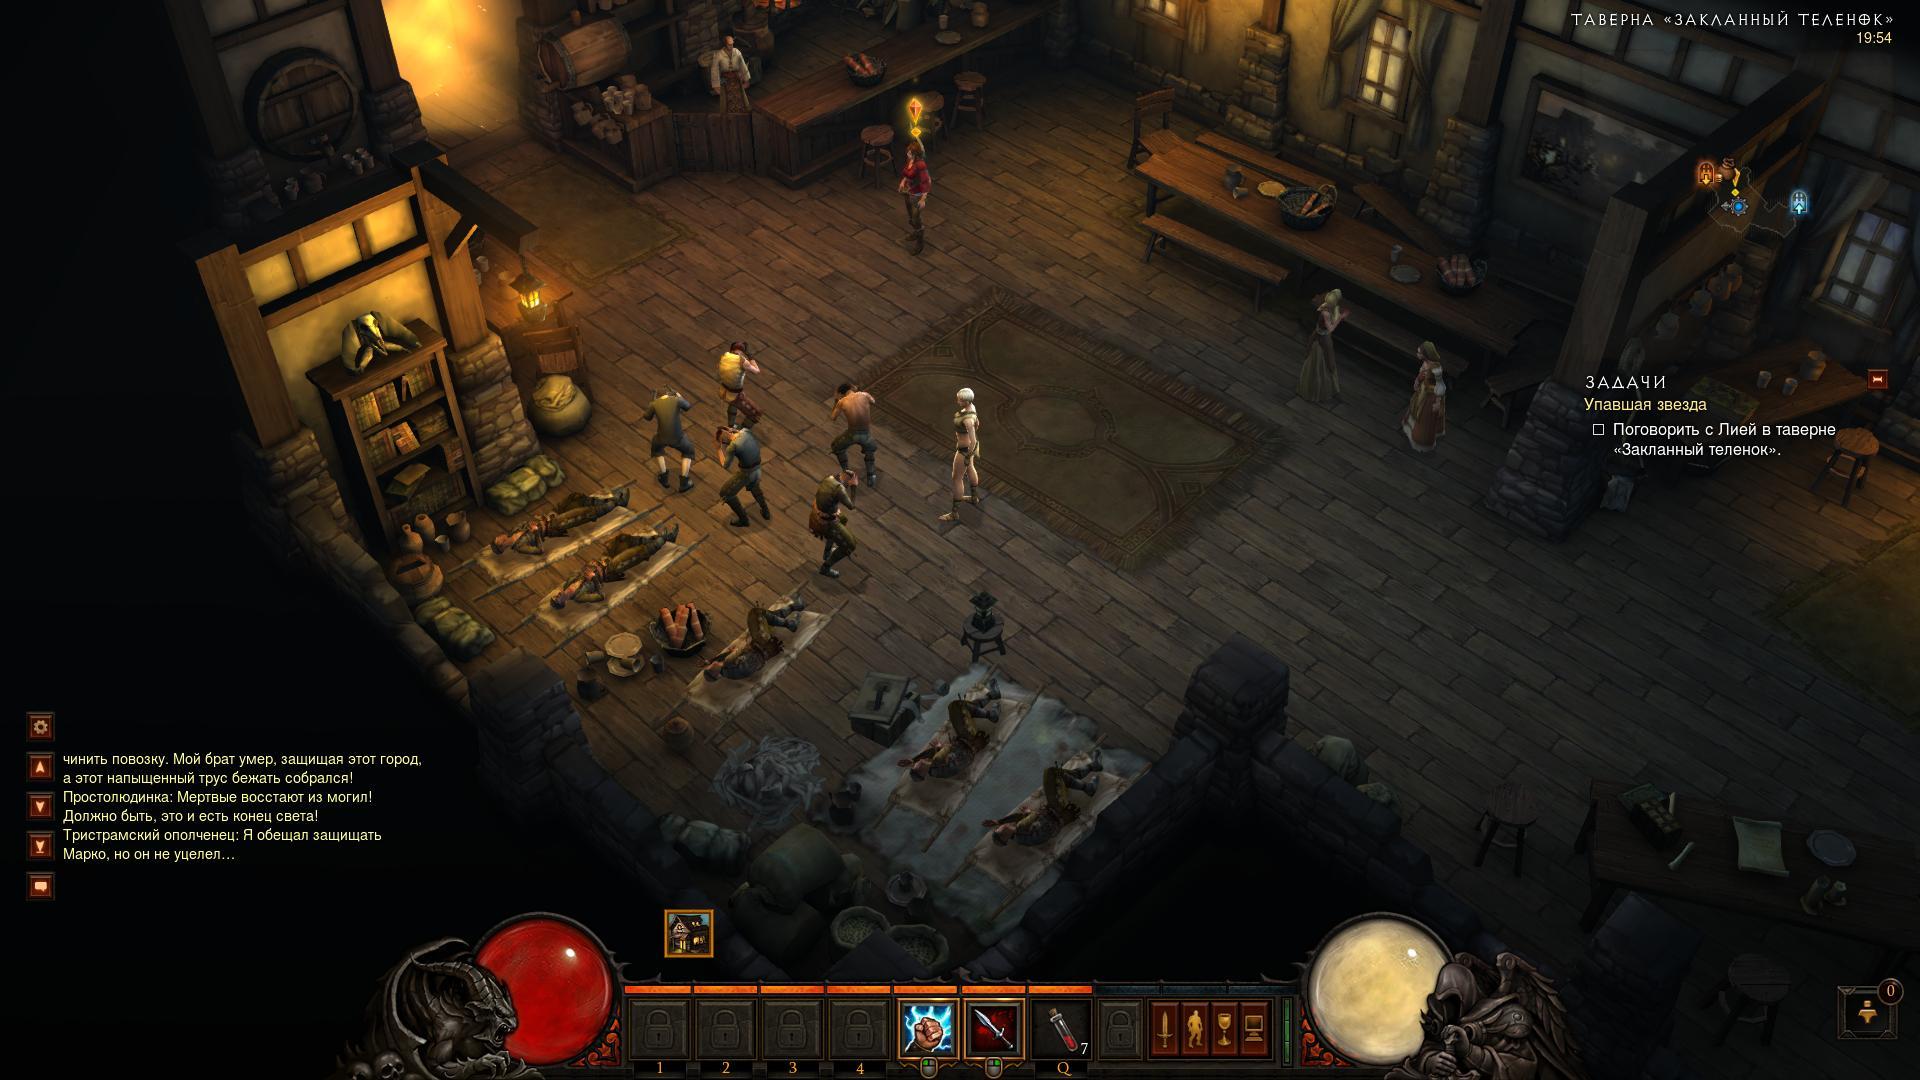 Blizzards confirms Diablo III: Eternal Collection for Xbox One